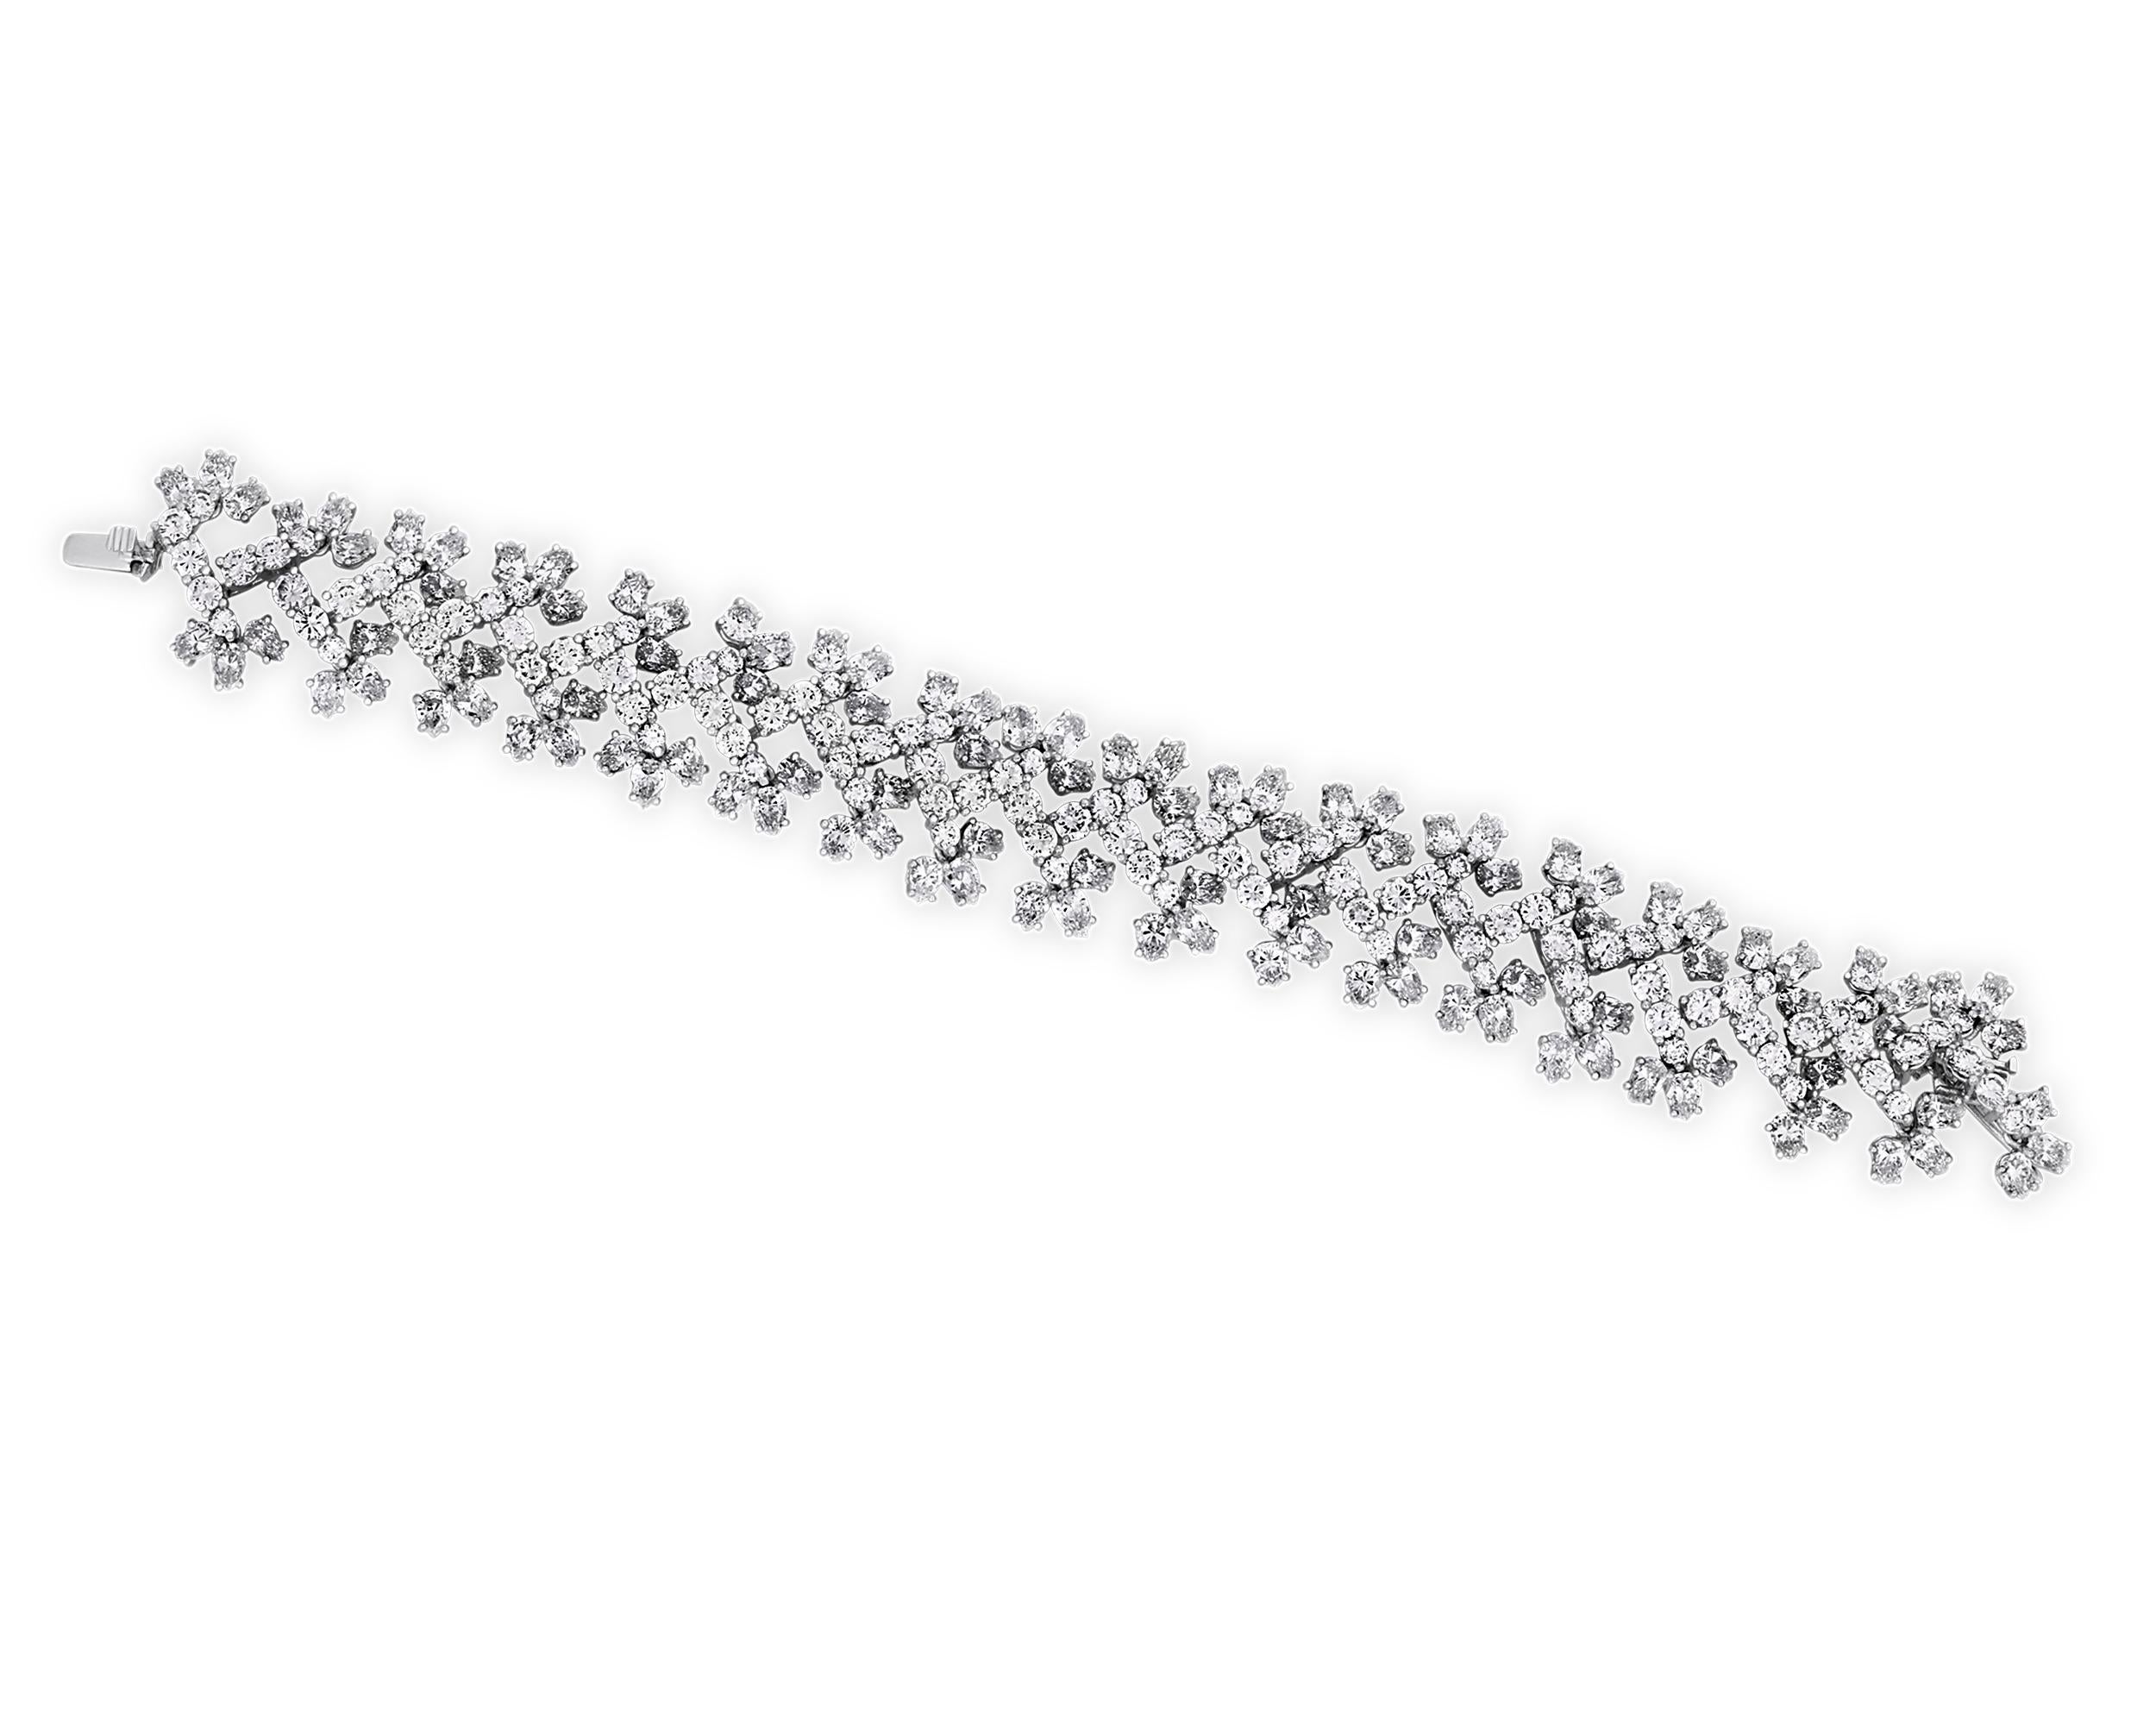 Crafted by world-renowned American jewelers Tiffany & Co., this dazzling bracelet is encrusted with 215 diamonds, totaling 20.10 carats. The platinum settings create an intricate snowflake design, eliciting a captivating visual effect of elegance